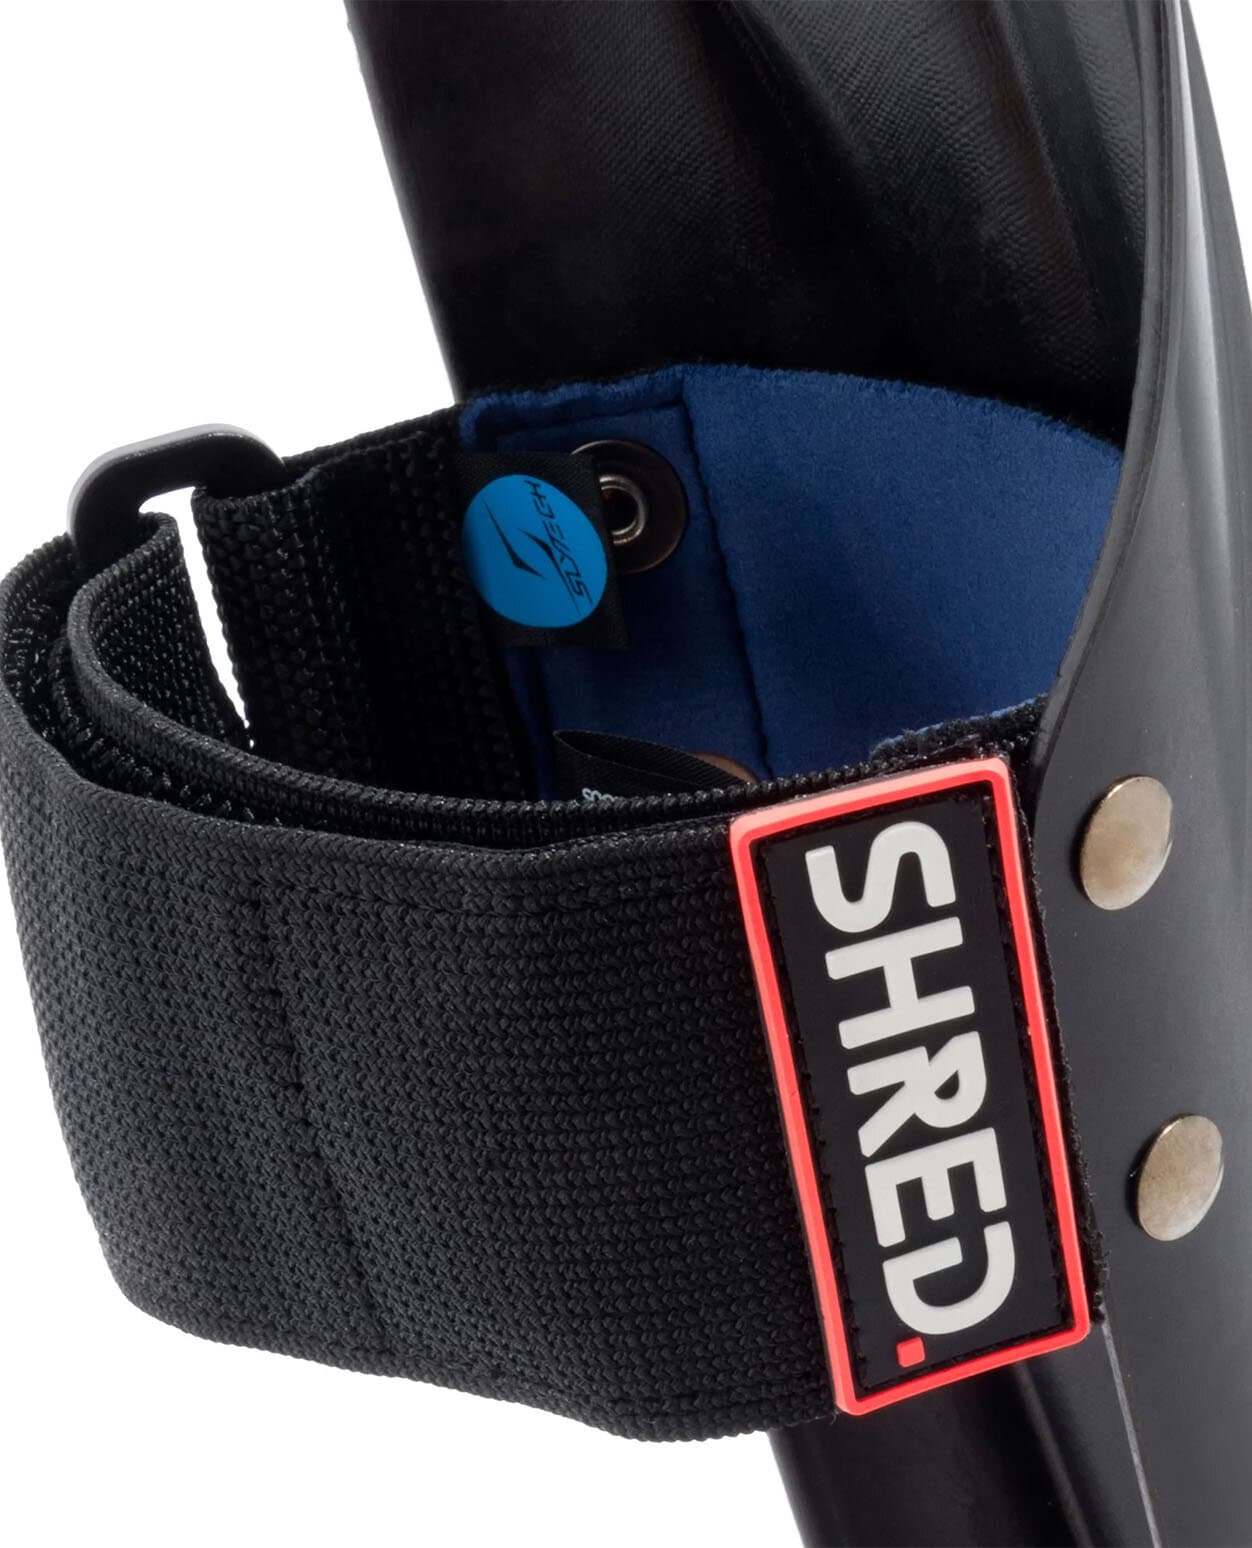 Shred Carbon Arm Guards